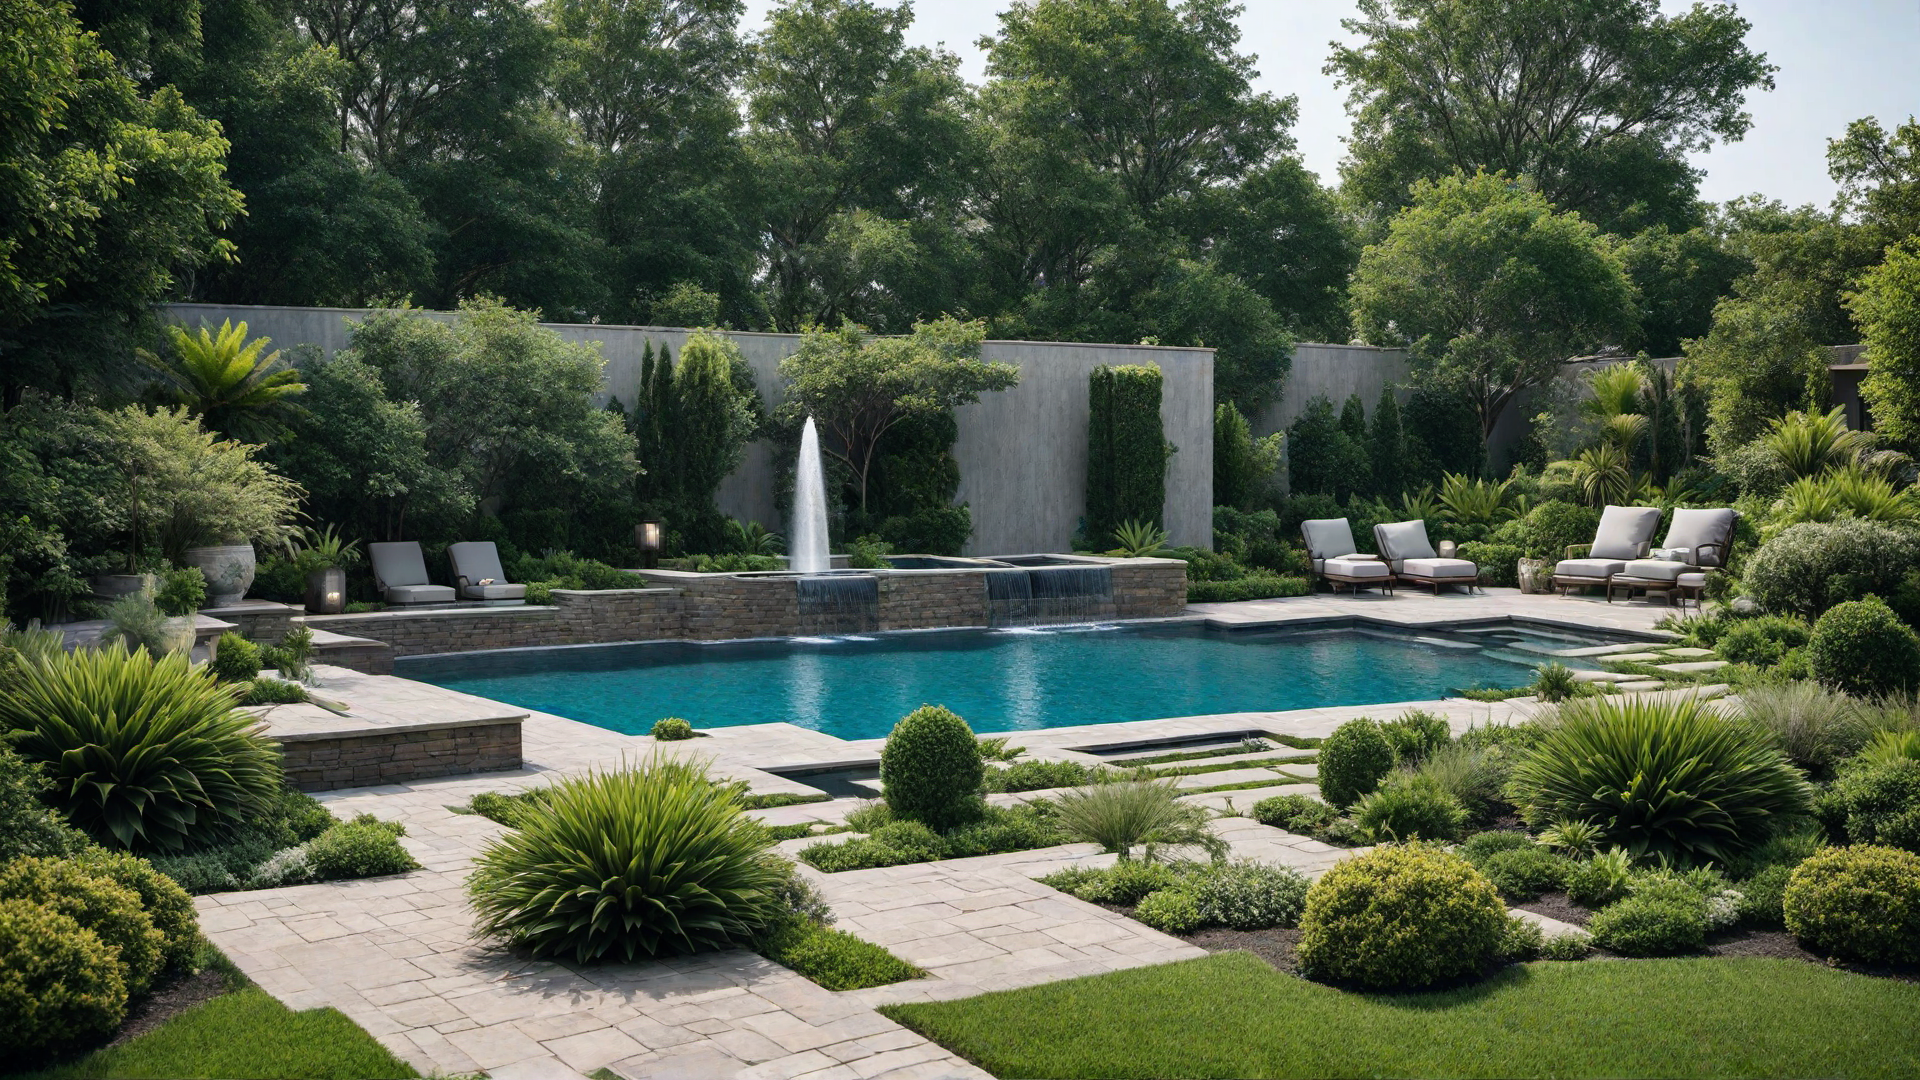 Elegant Pool Fountain as a Central Feature